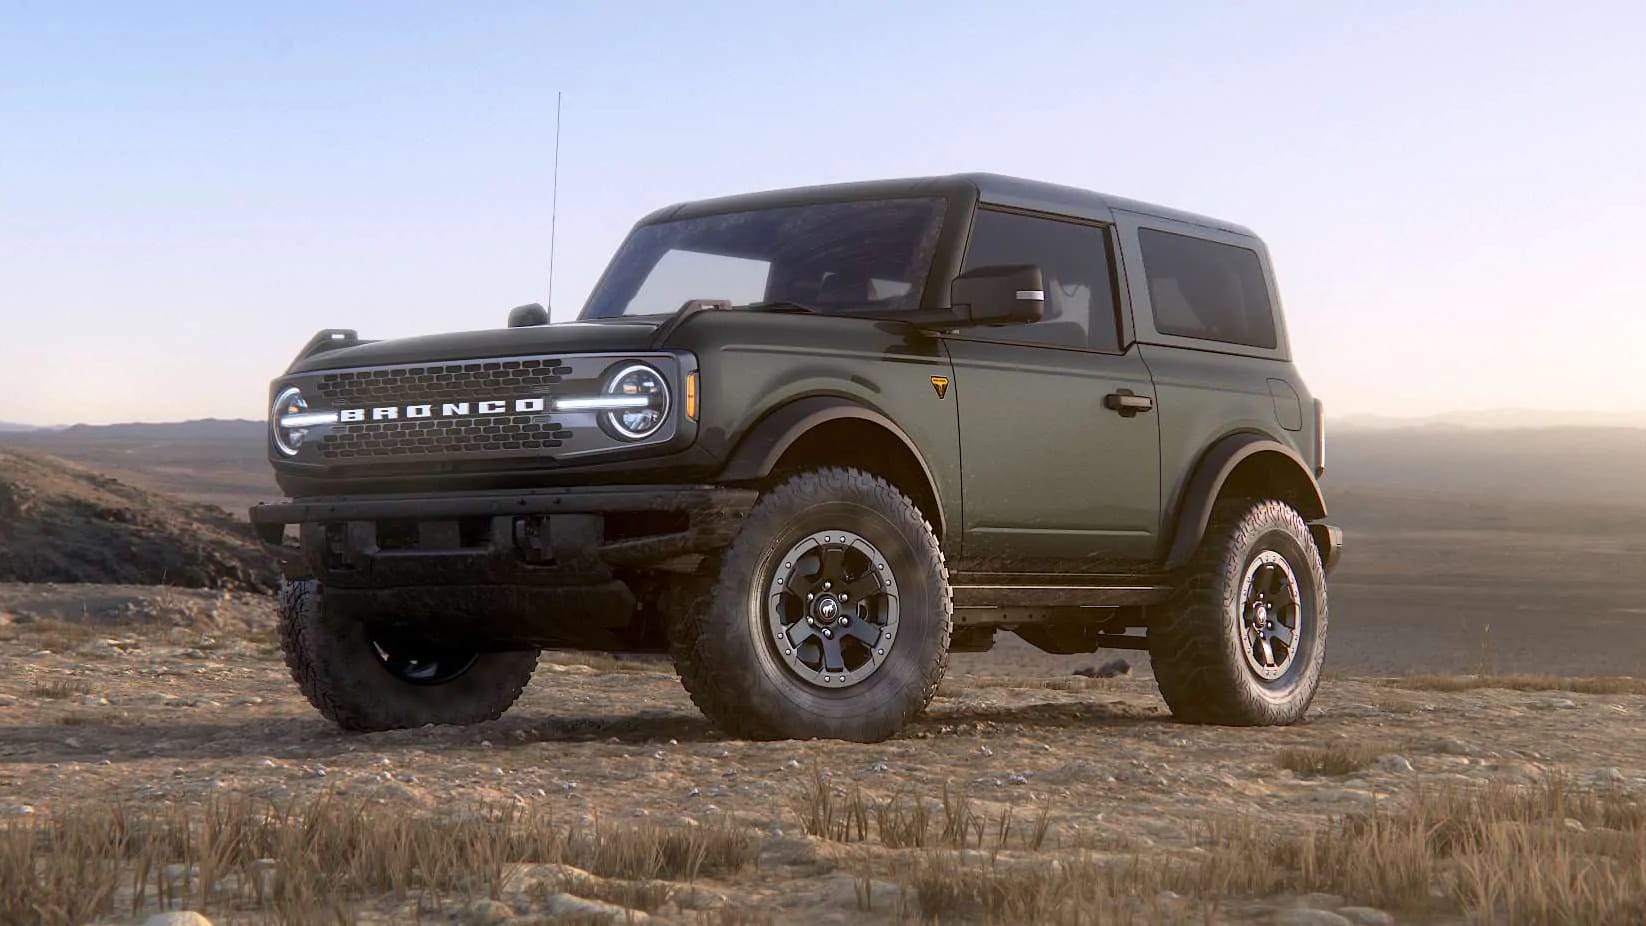 What Are the Best Small SUVs for Off-Roading?